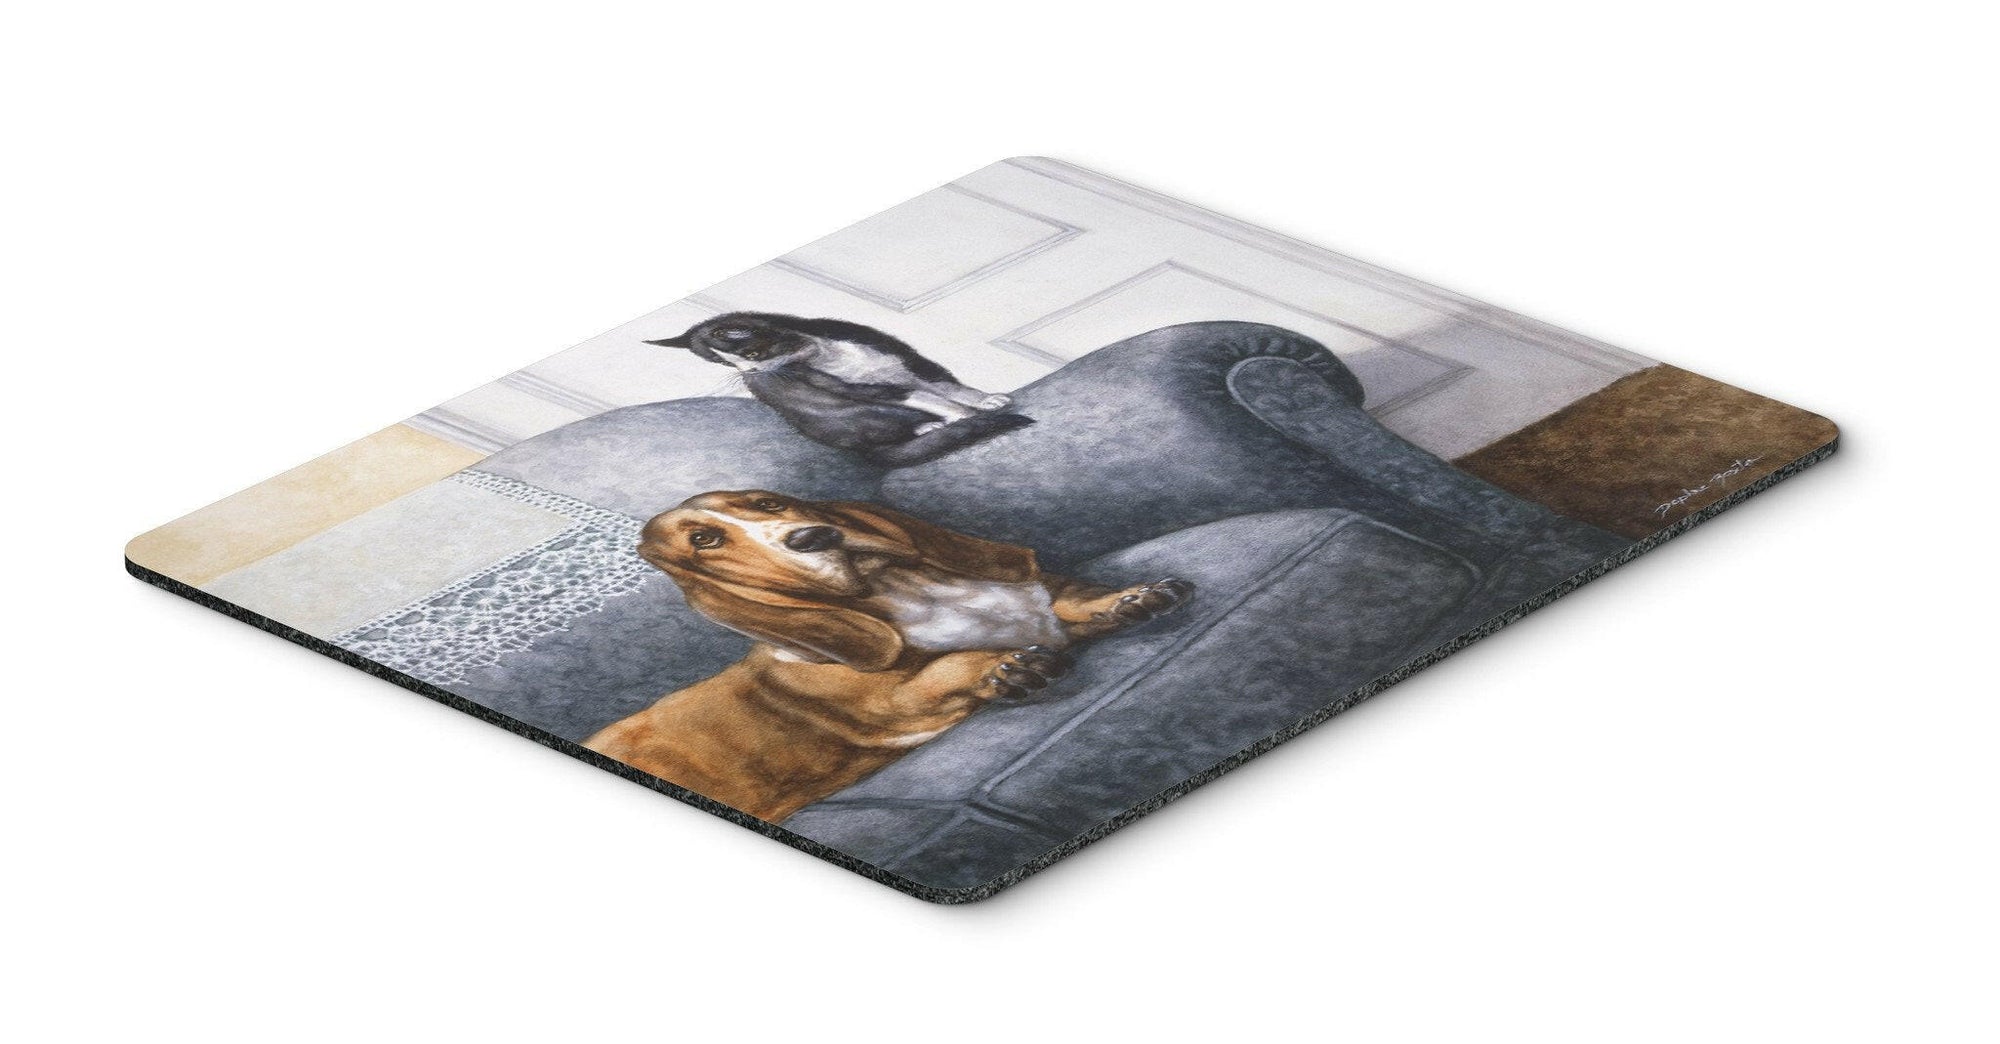 Basset Hound and Cat on couch Mouse Pad, Hot Pad or Trivet BDBA0182MP by Caroline's Treasures